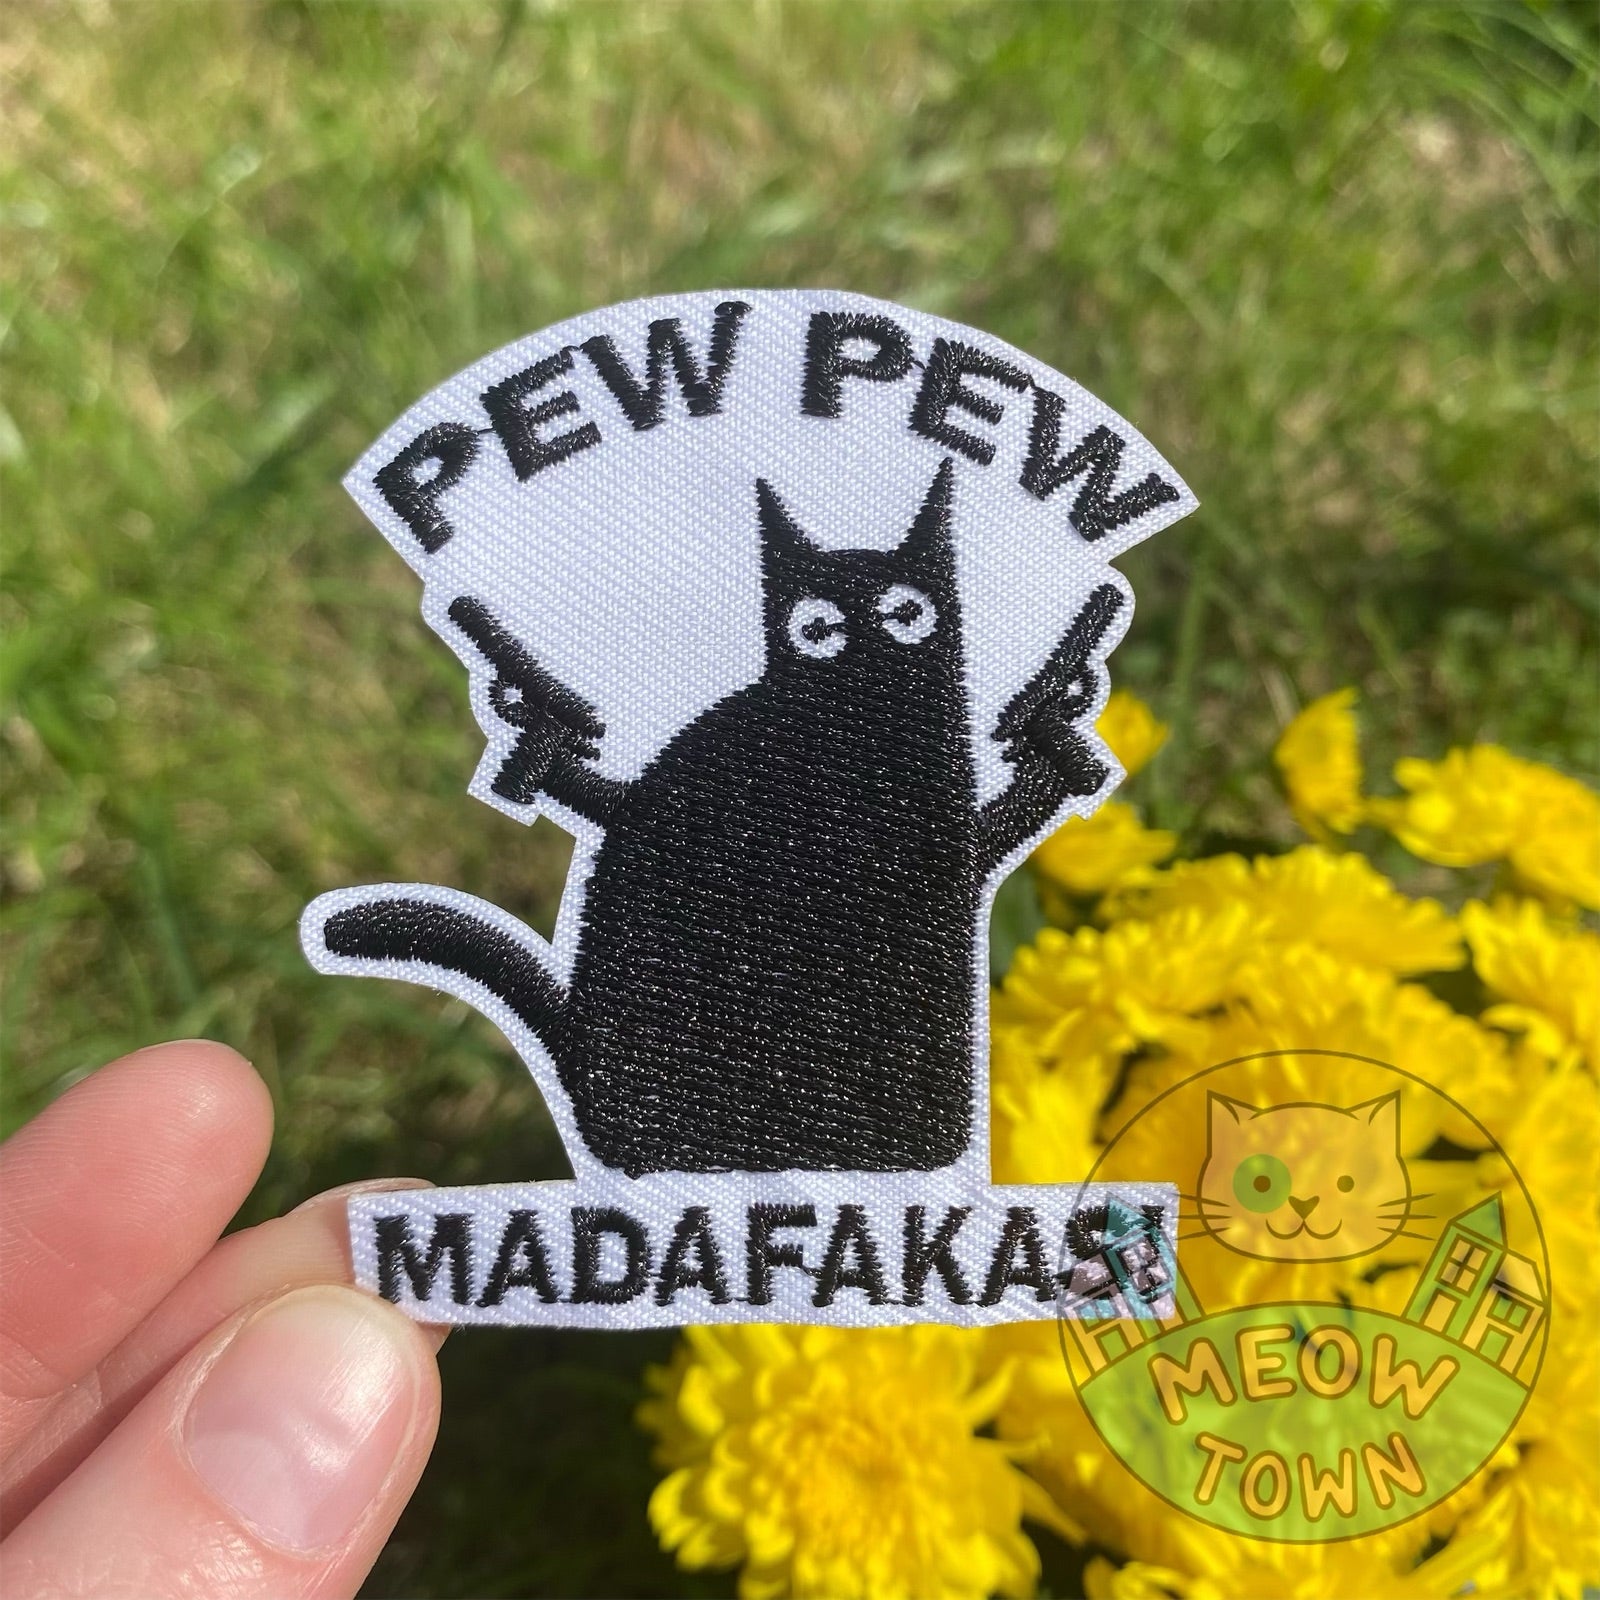 Funny embroidered iron-on patch with ‘Pew pew madafakas!’ slogan. A perfect way to bring new life to your old garments or to cover small holes or marks with this cute patch!